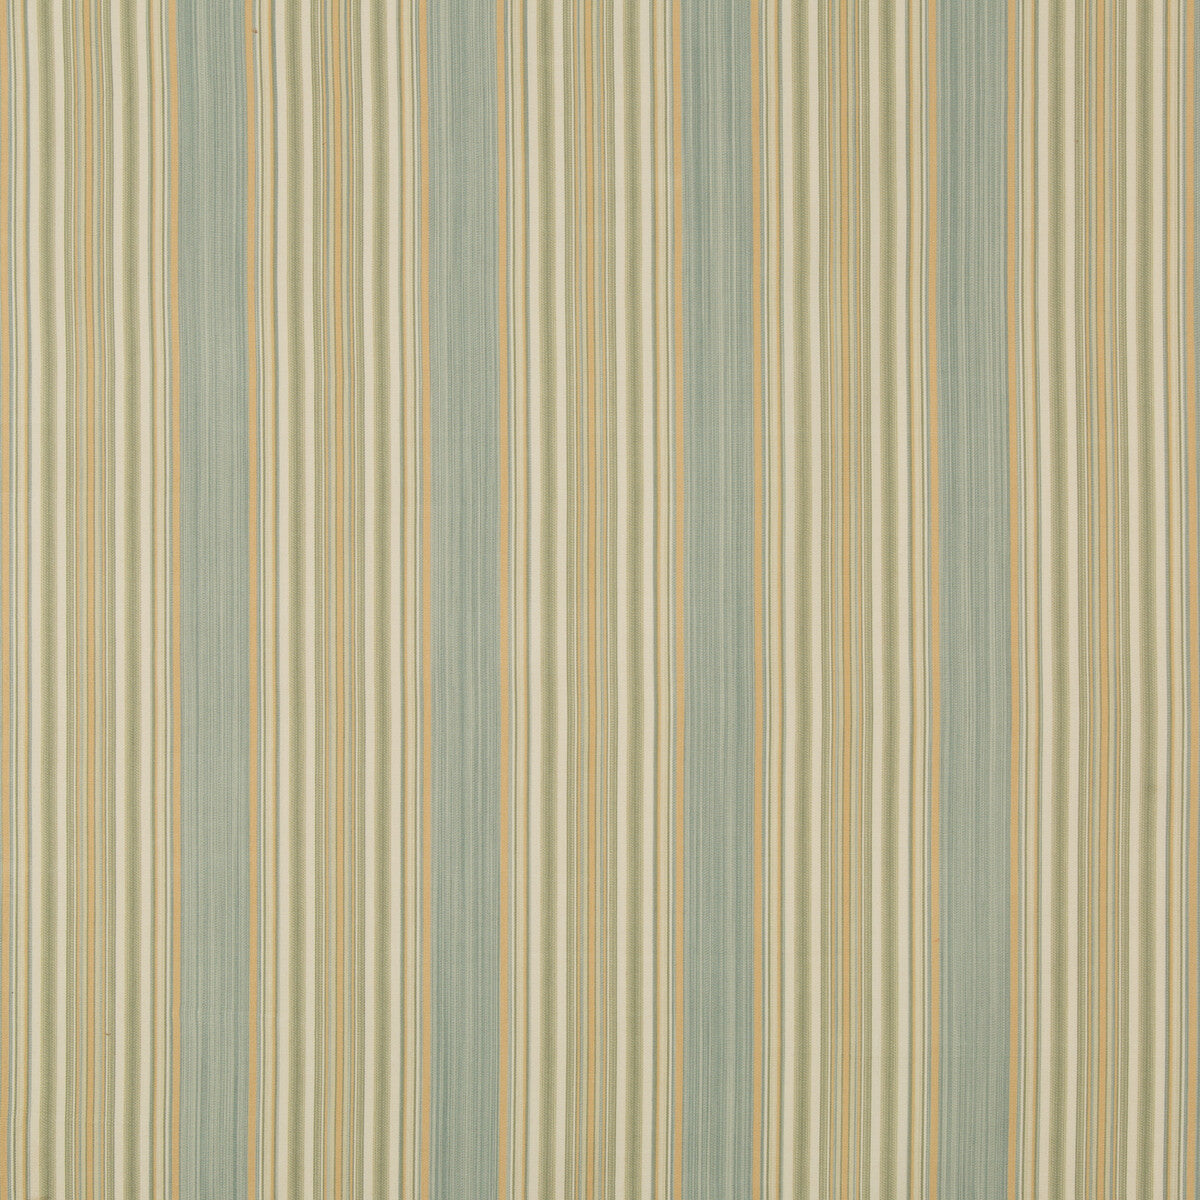 Vyne Stripe fabric in mist color - pattern 2019103.133.0 - by Lee Jofa in the Manor House collection